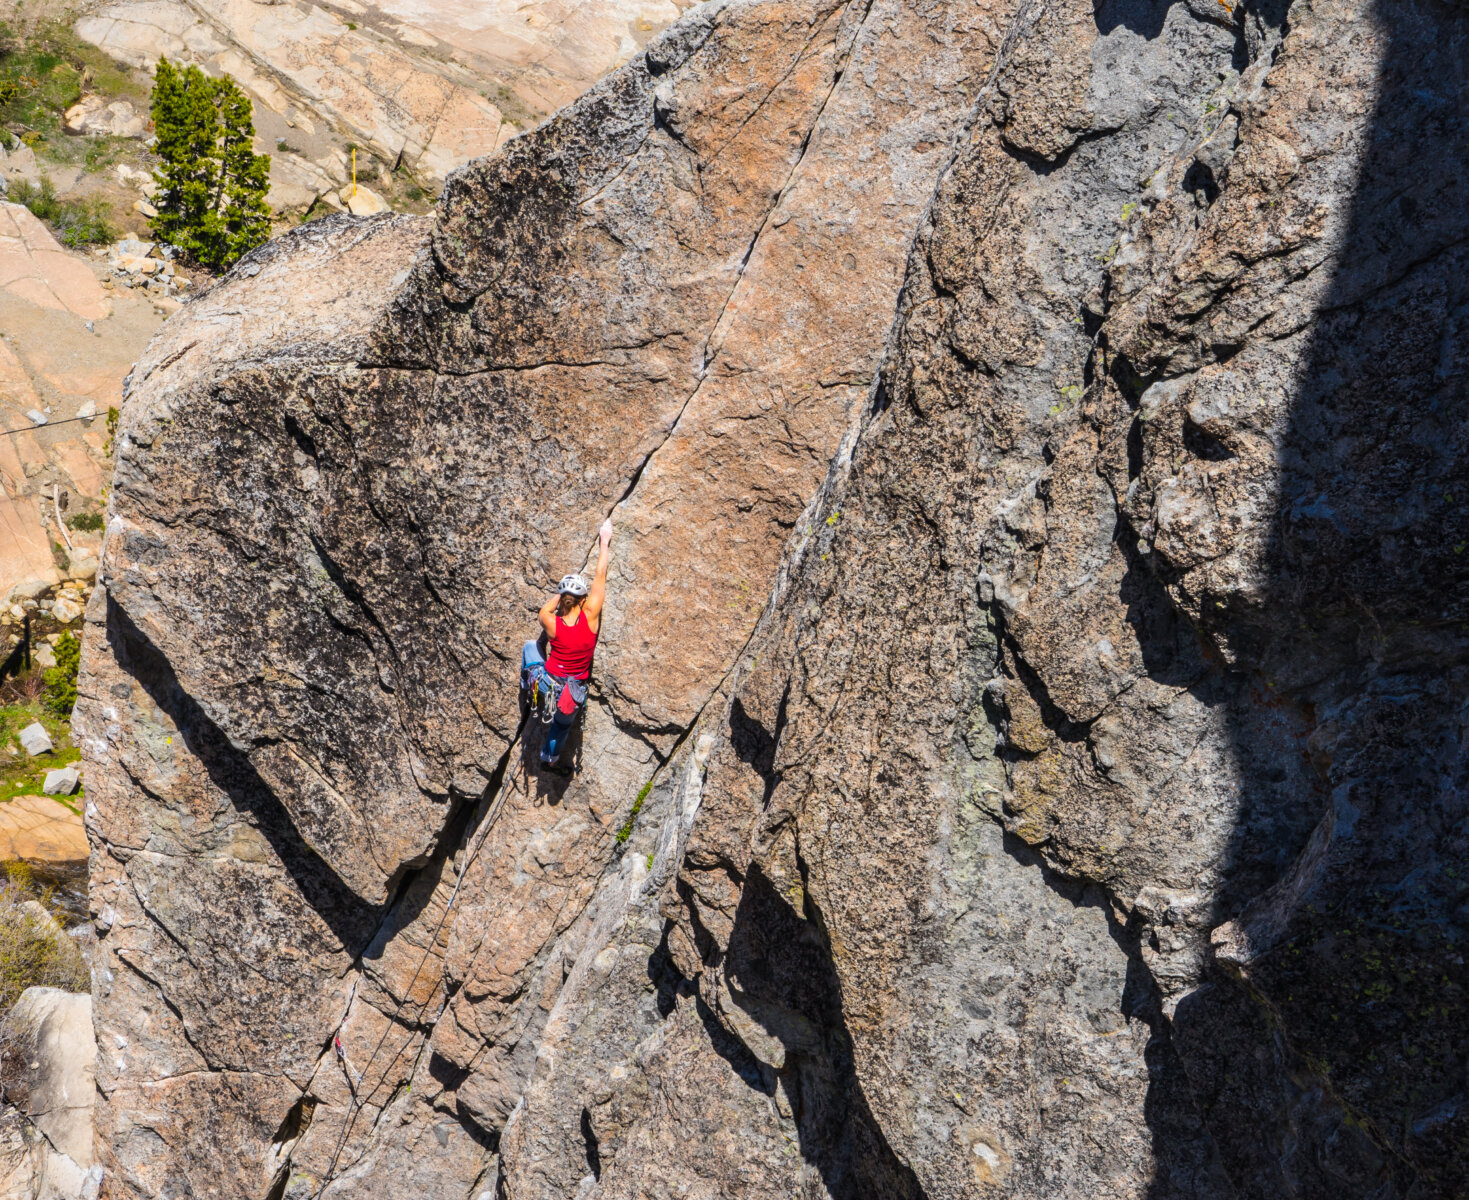 Learn to Lead Climb in Tahoe, Learn to Lead Climb in Tahoe, rock climbing tahoe, lake tahoe climbing, donner summit, lovers leap, learn to multi-pitch climb tahoe, multipitch climb tahoe, lake tahoe rock climbing, climb tahoe, sport routes tahoe, lead climbing